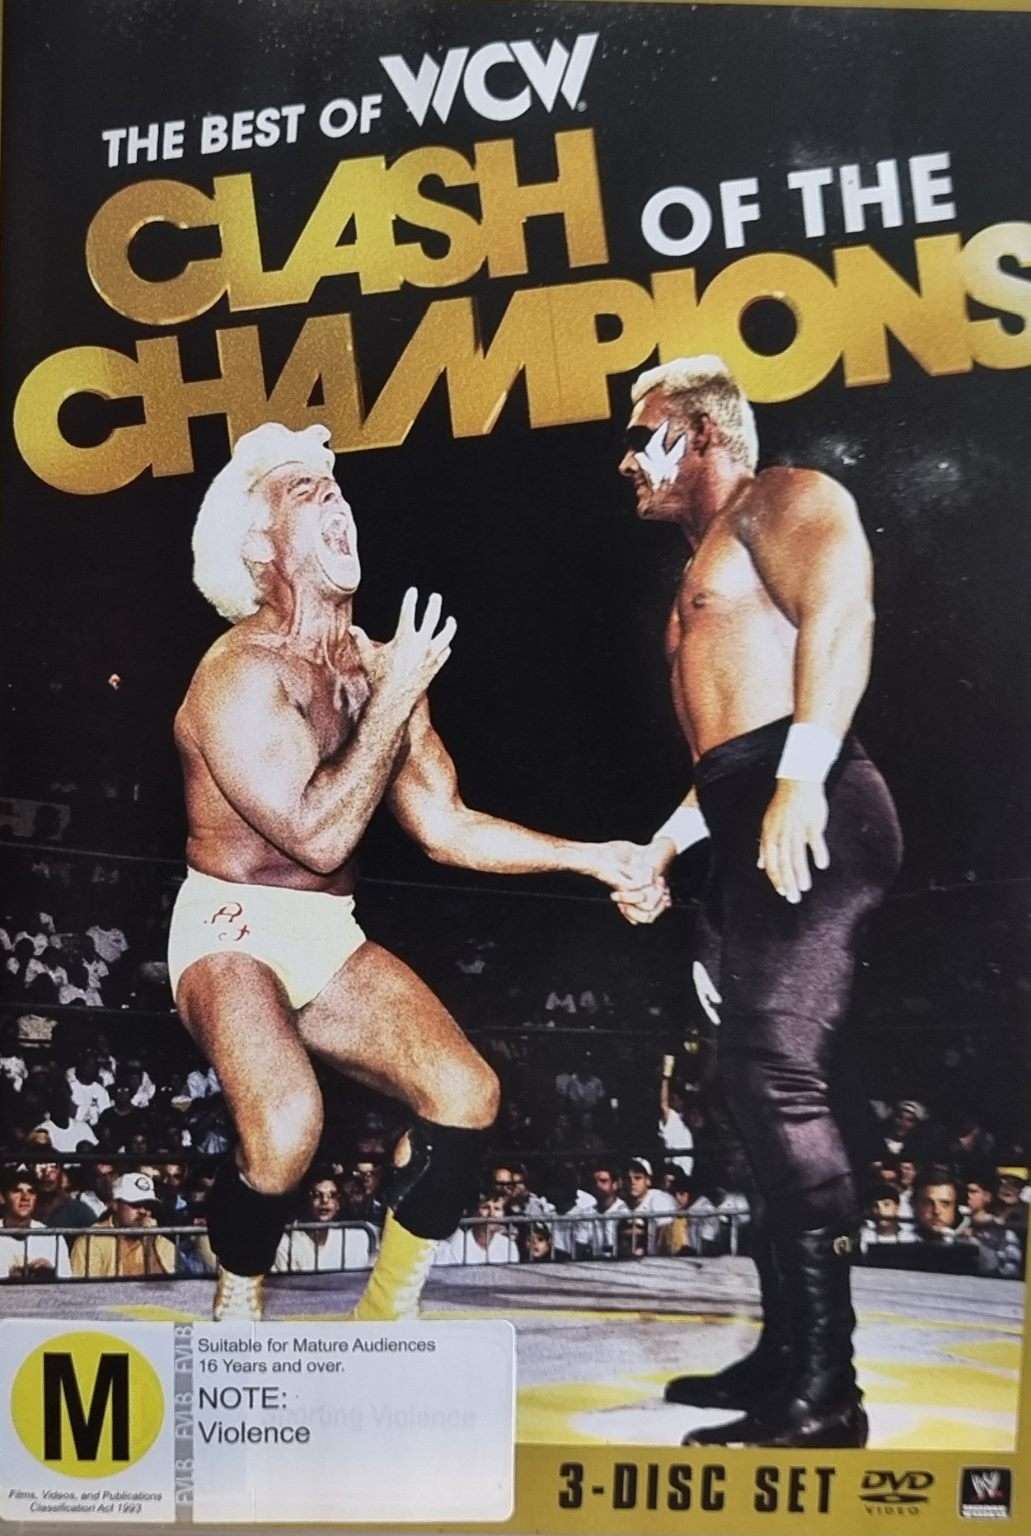 WWE: The Best of of WCW - Clash of the Champions 3 Disc Set